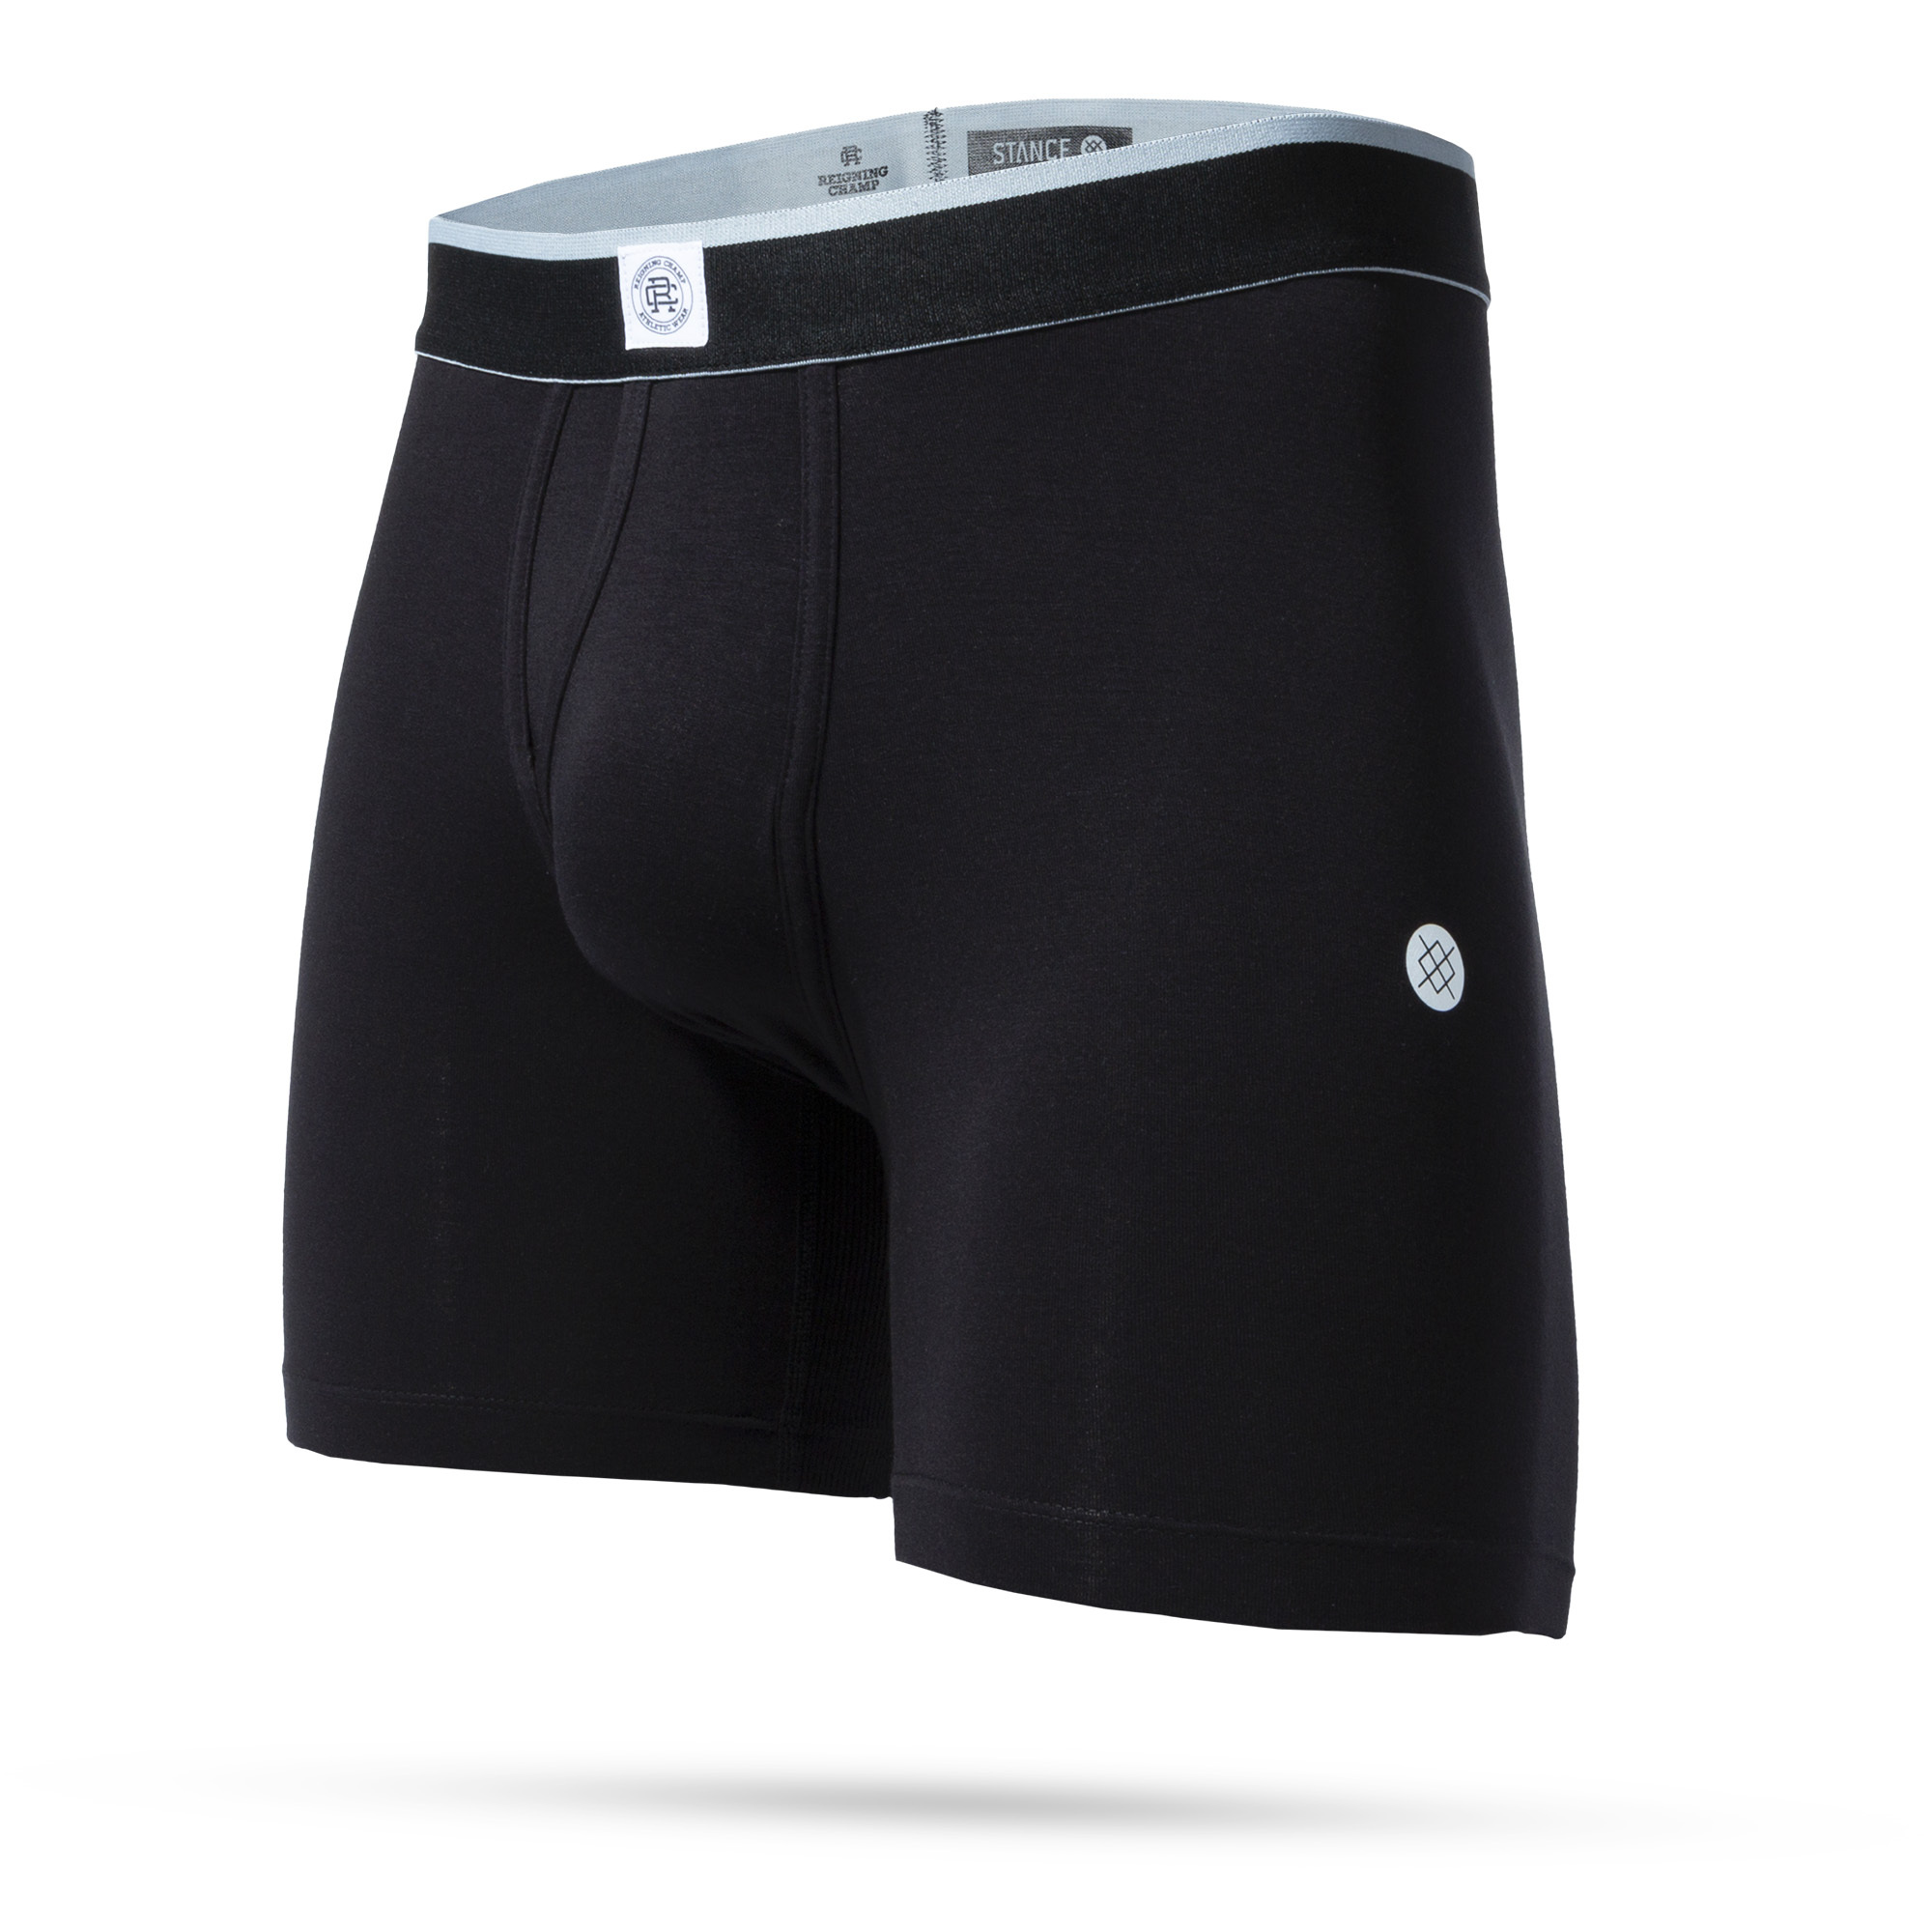 Stance Staple St Boxer Brief with Wholester Pouch, Heather Grey (L) 